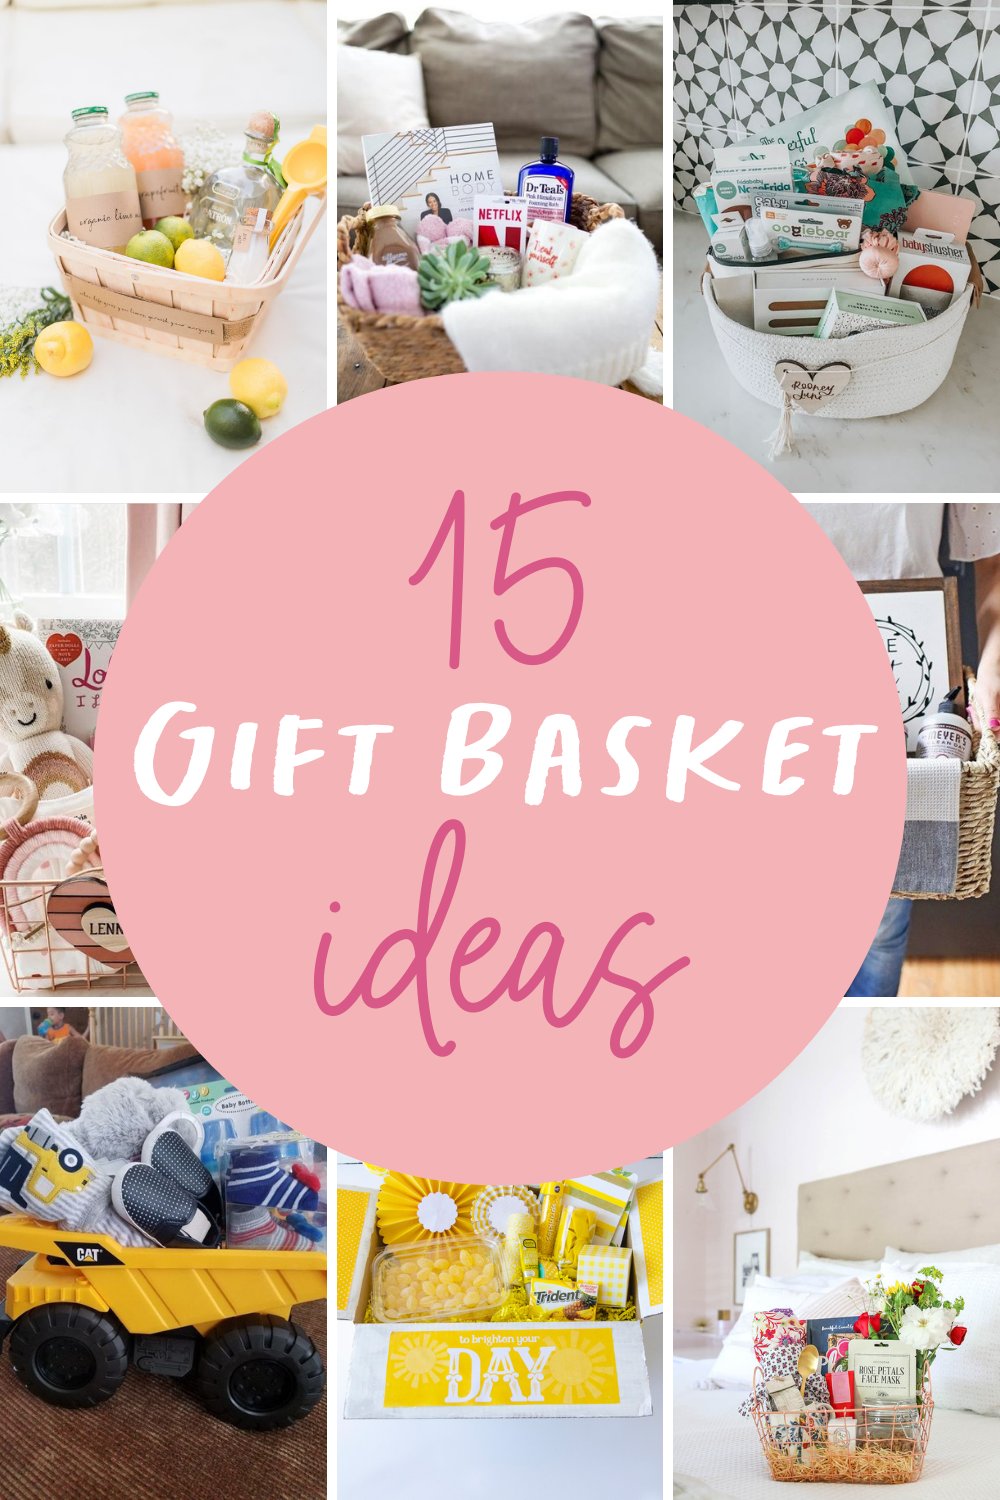 15 Gift Basket Ideas Everyone Will Love Receiving - Love The Day